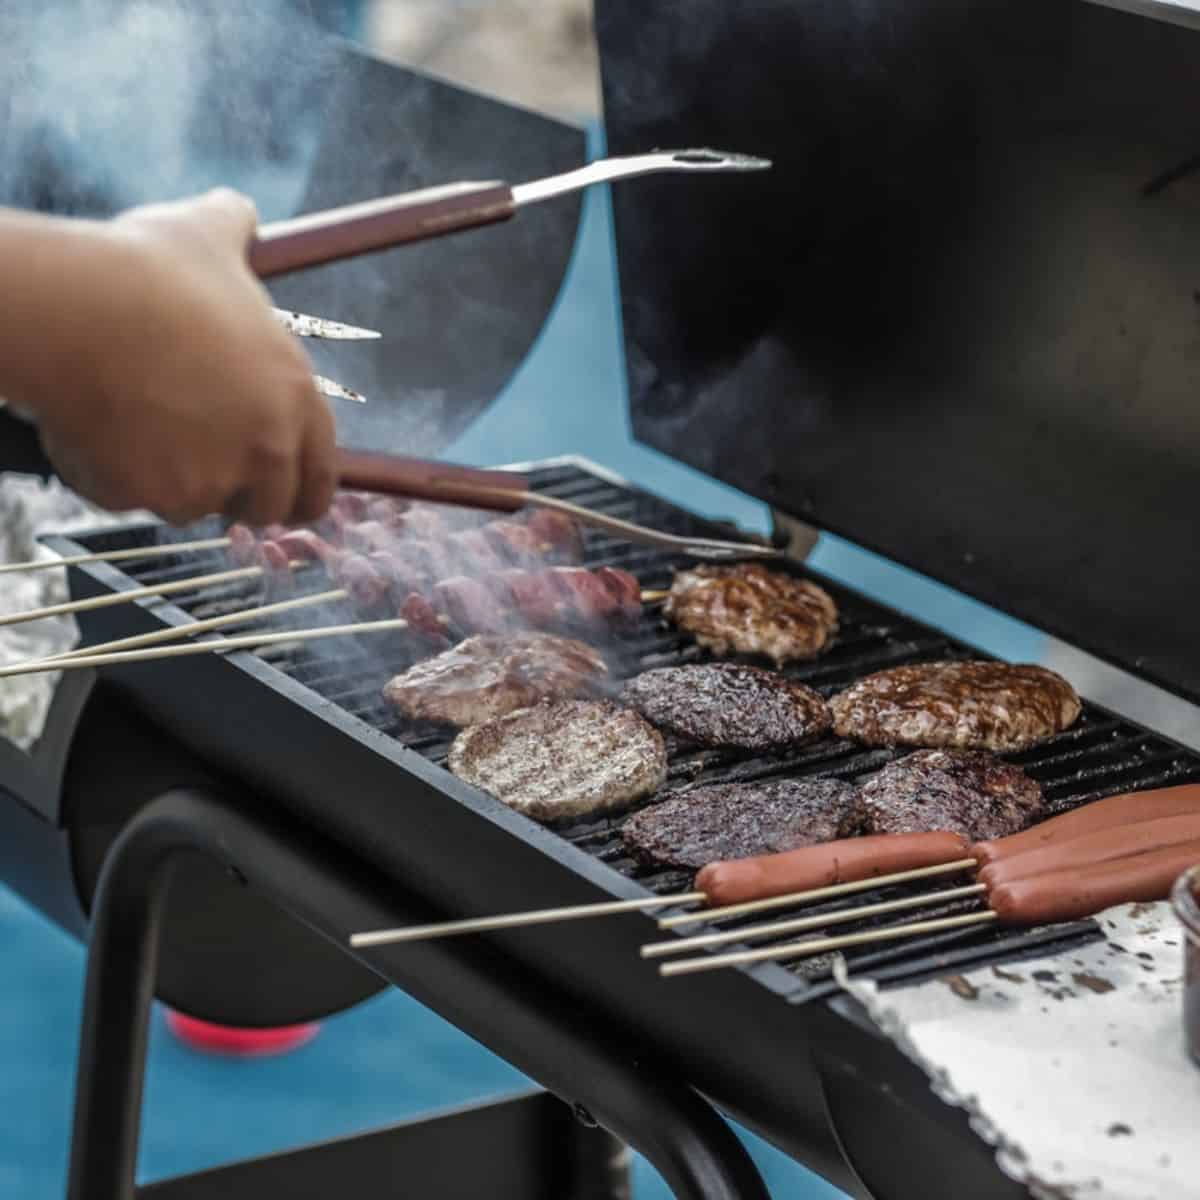 A beginners guide to using Propane Tank BBQ Grill